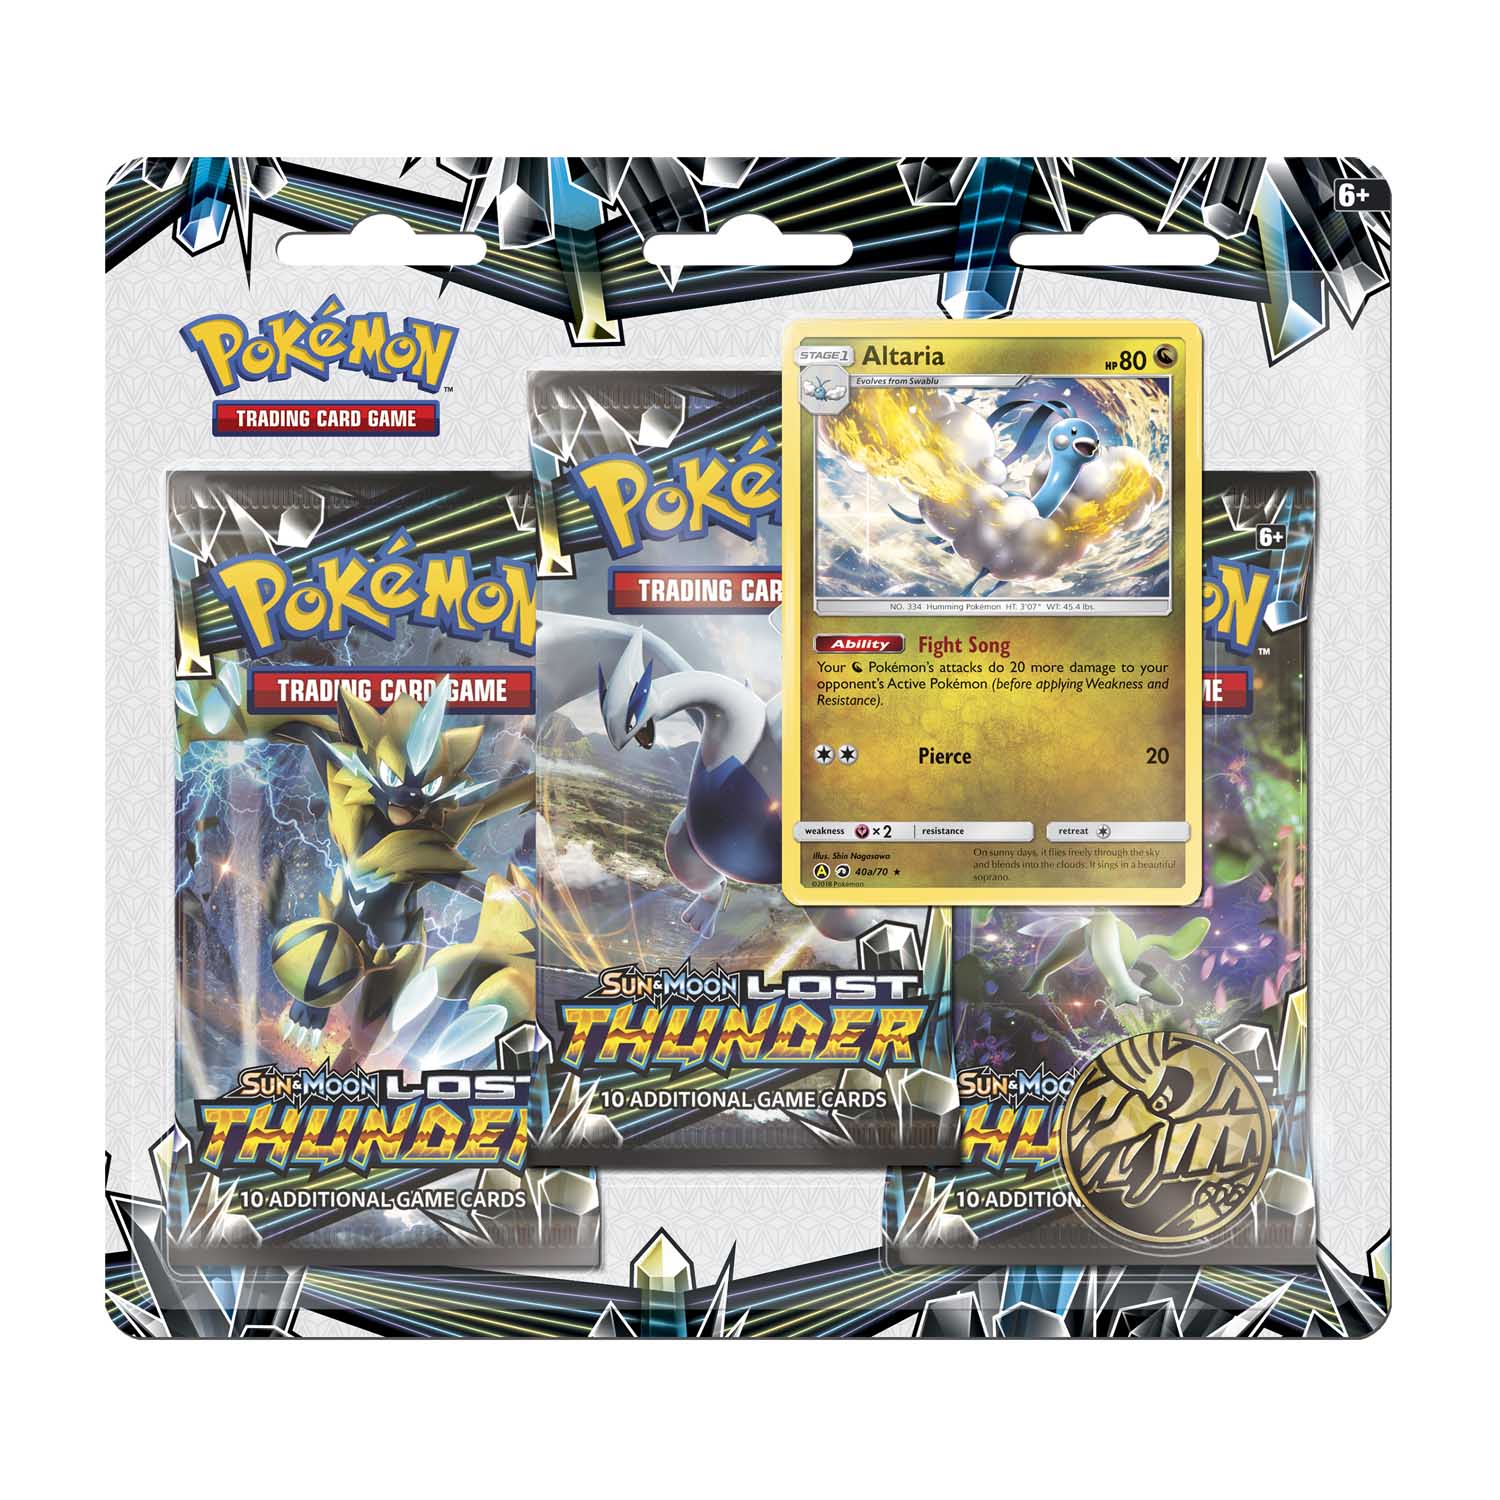 Pokemon TCG Sun & Moon Lost Thunder 3 Blistered Booster Pack Containing 10 Cardsper Pack with Over 210 New Cards to Collect 